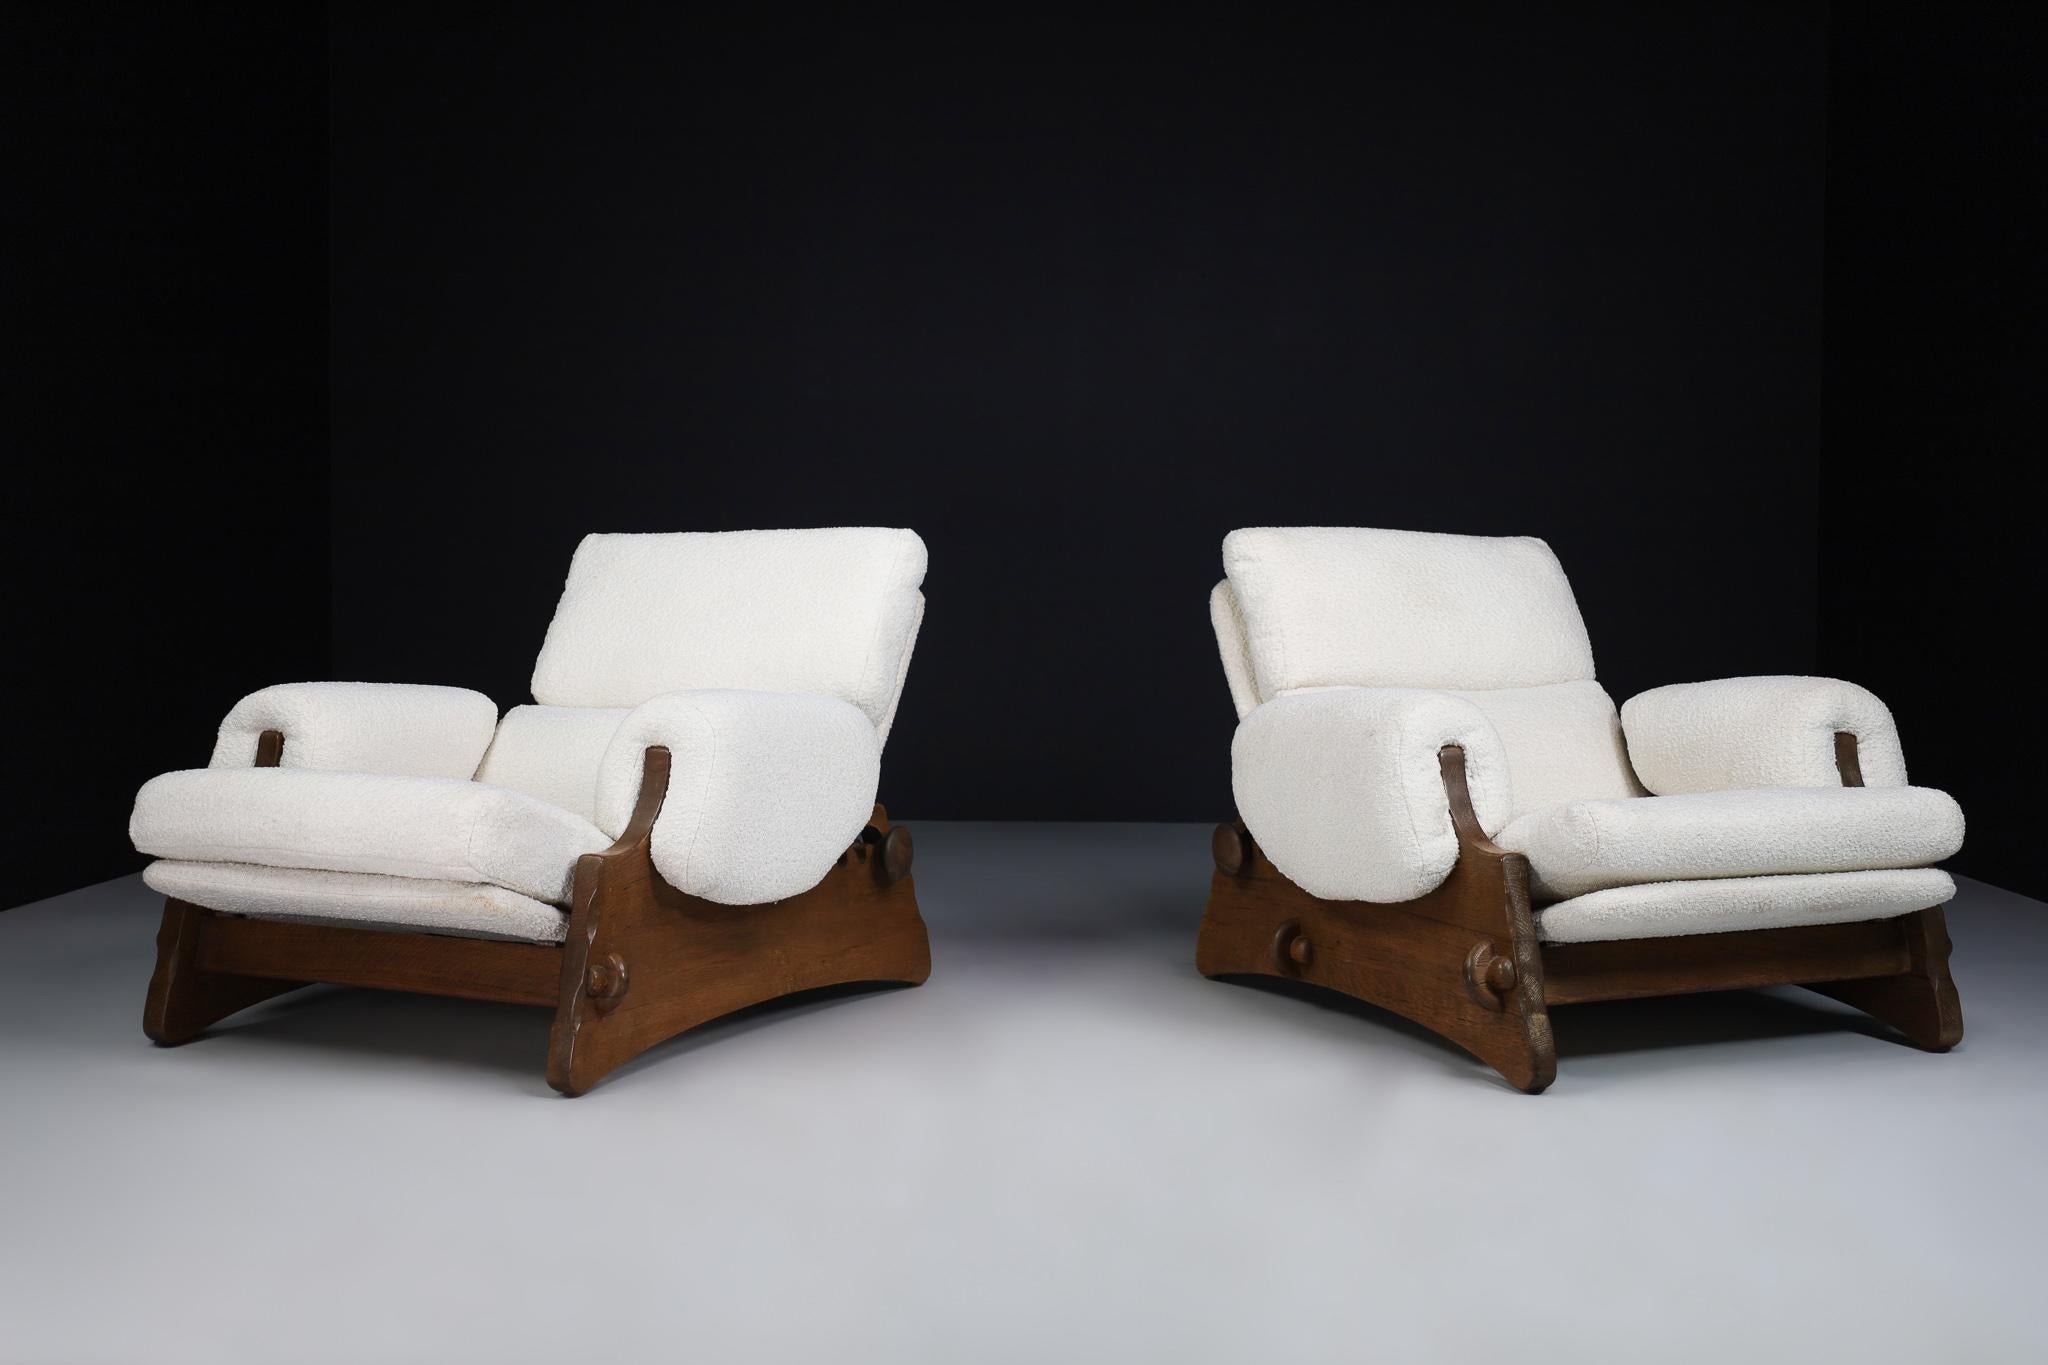 Mid-Century Modern XL Brutalist Lounge Chairs in Oak and Bouclé, Spain 1960s. 

These are Mid-Century Modern XL Brutalist Lounge Chairs made of Oak and Bouclé, originating from Spain in the 1960s. They make for a stunning addition to any interior,